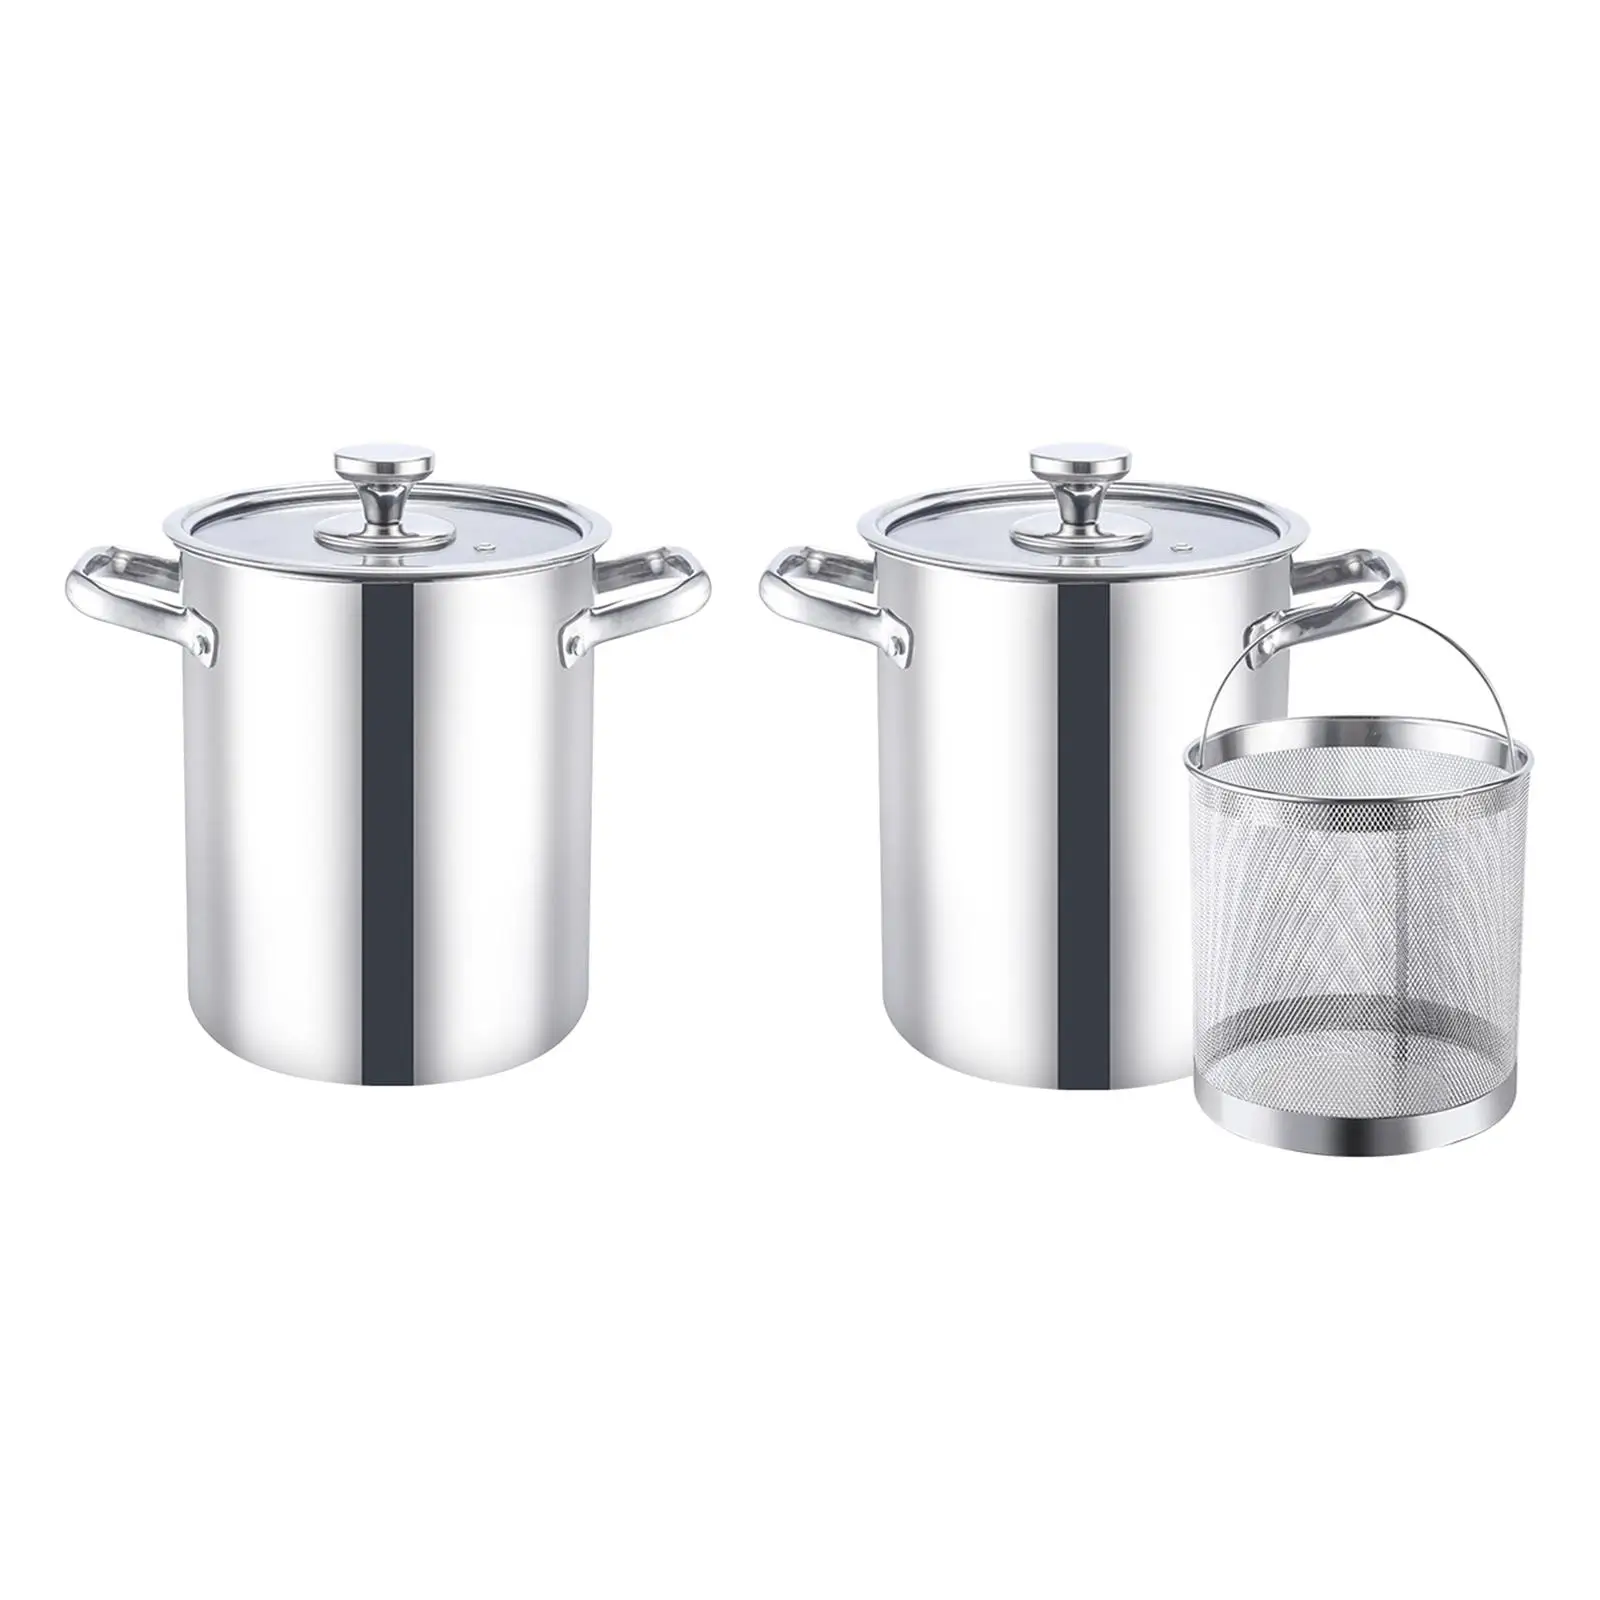 304 Stainless Steel Stockpot, Large Deep Frying Stock Pots, with Double Handle & Glass Lid, Heavy Duty Kitchen Soup Pot